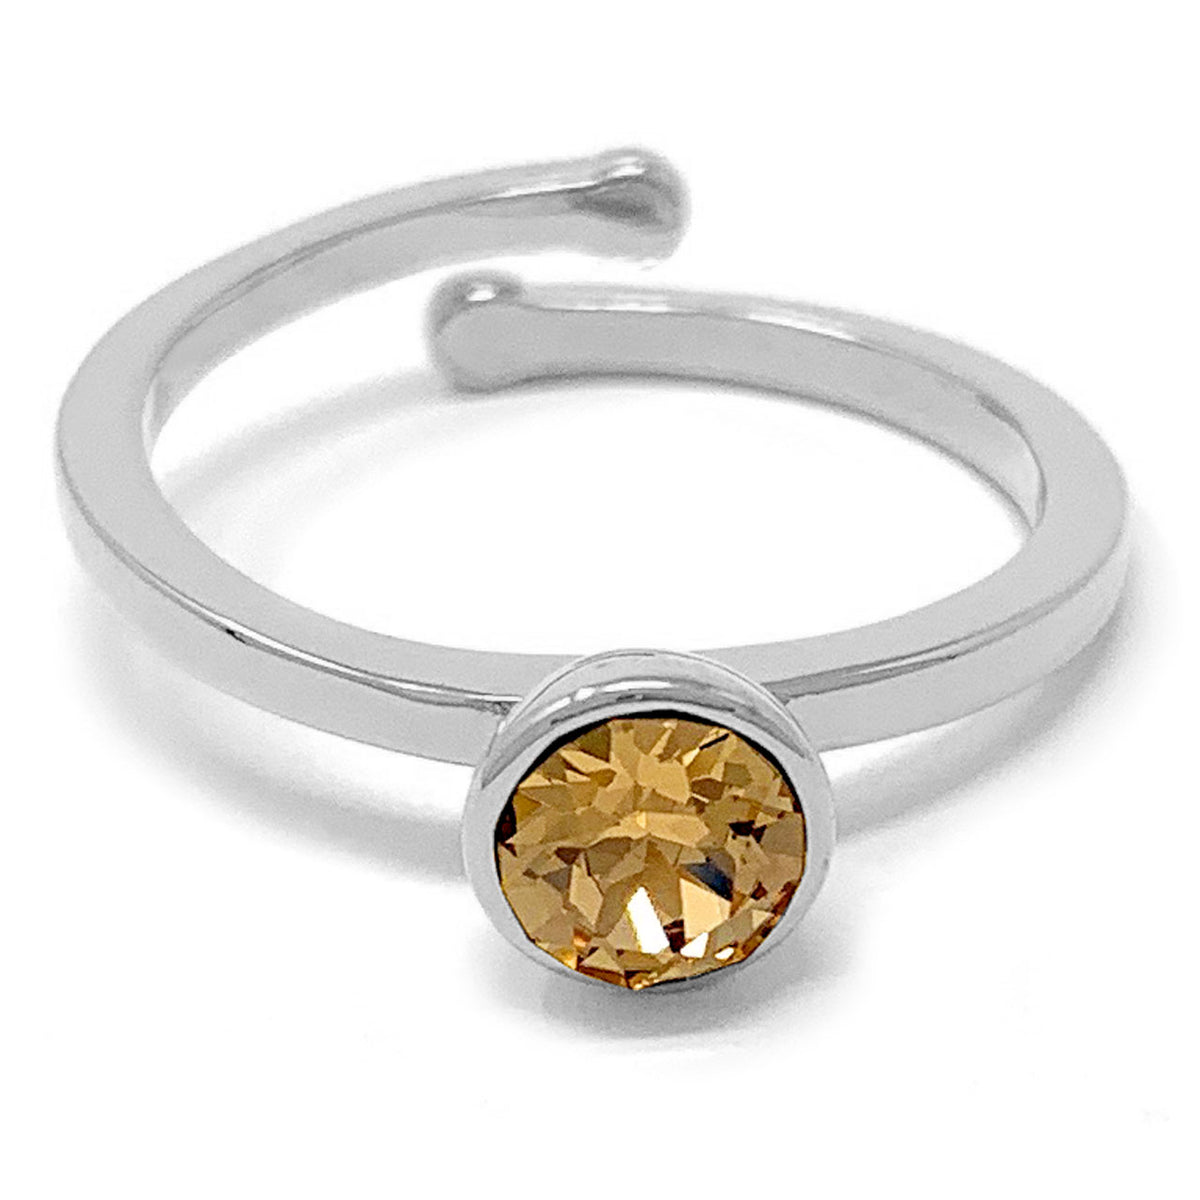 Harley Adjustable Ring with Yellow Brown Light Topaz Round Crystals from Swarovski Silver Toned Rhodium Plated - Ed Heart